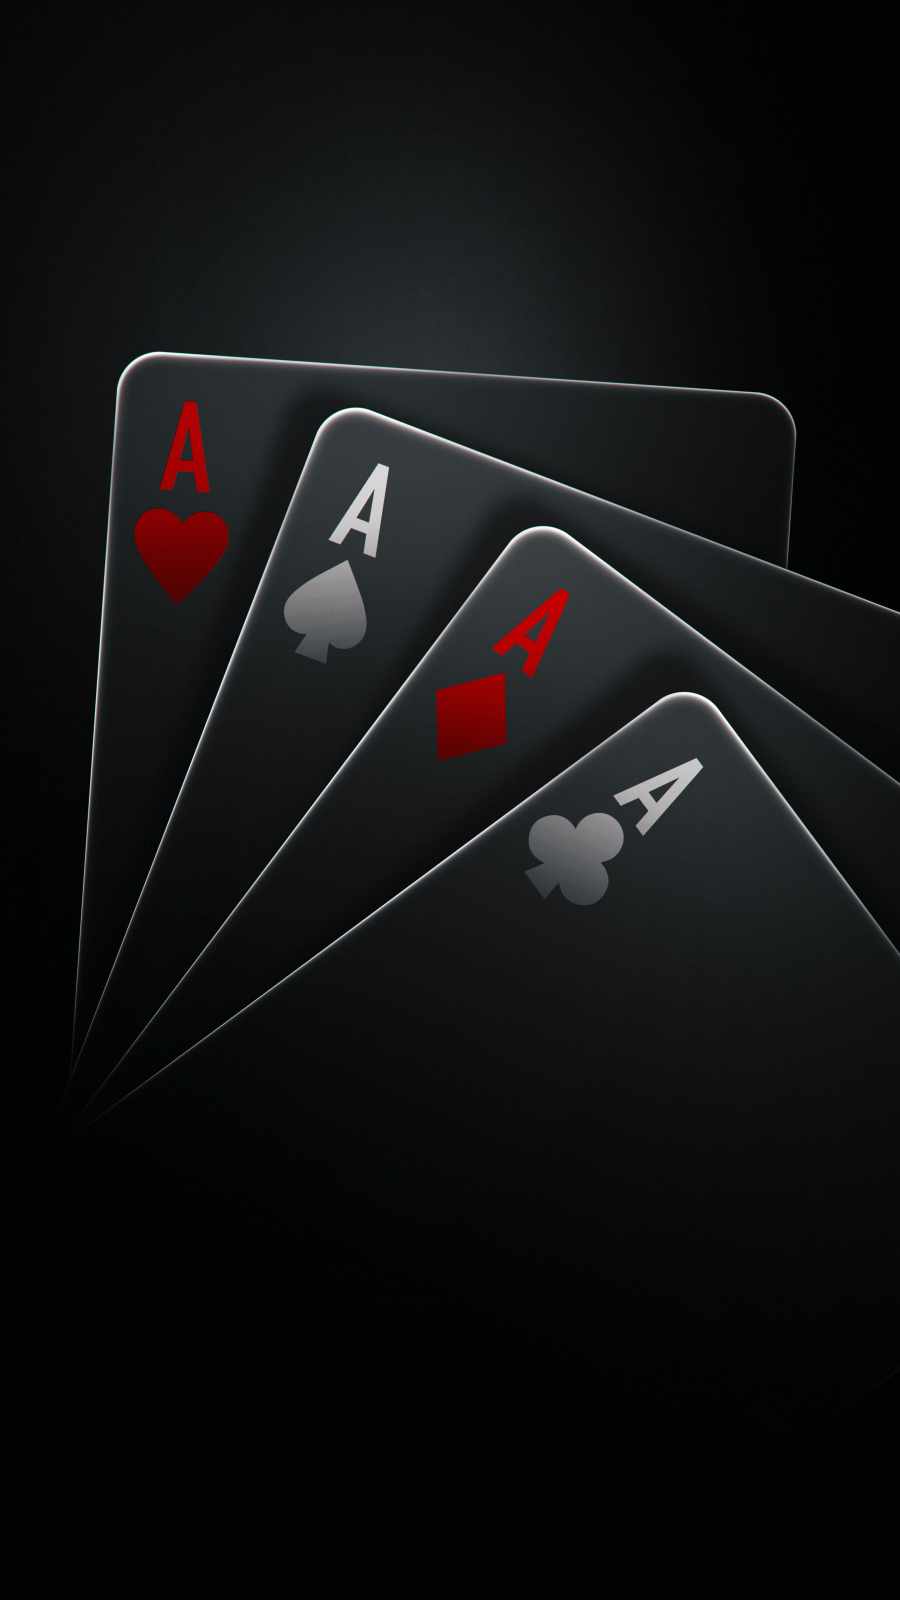 Playing Cards Photos Download The BEST Free Playing Cards Stock Photos   HD Images